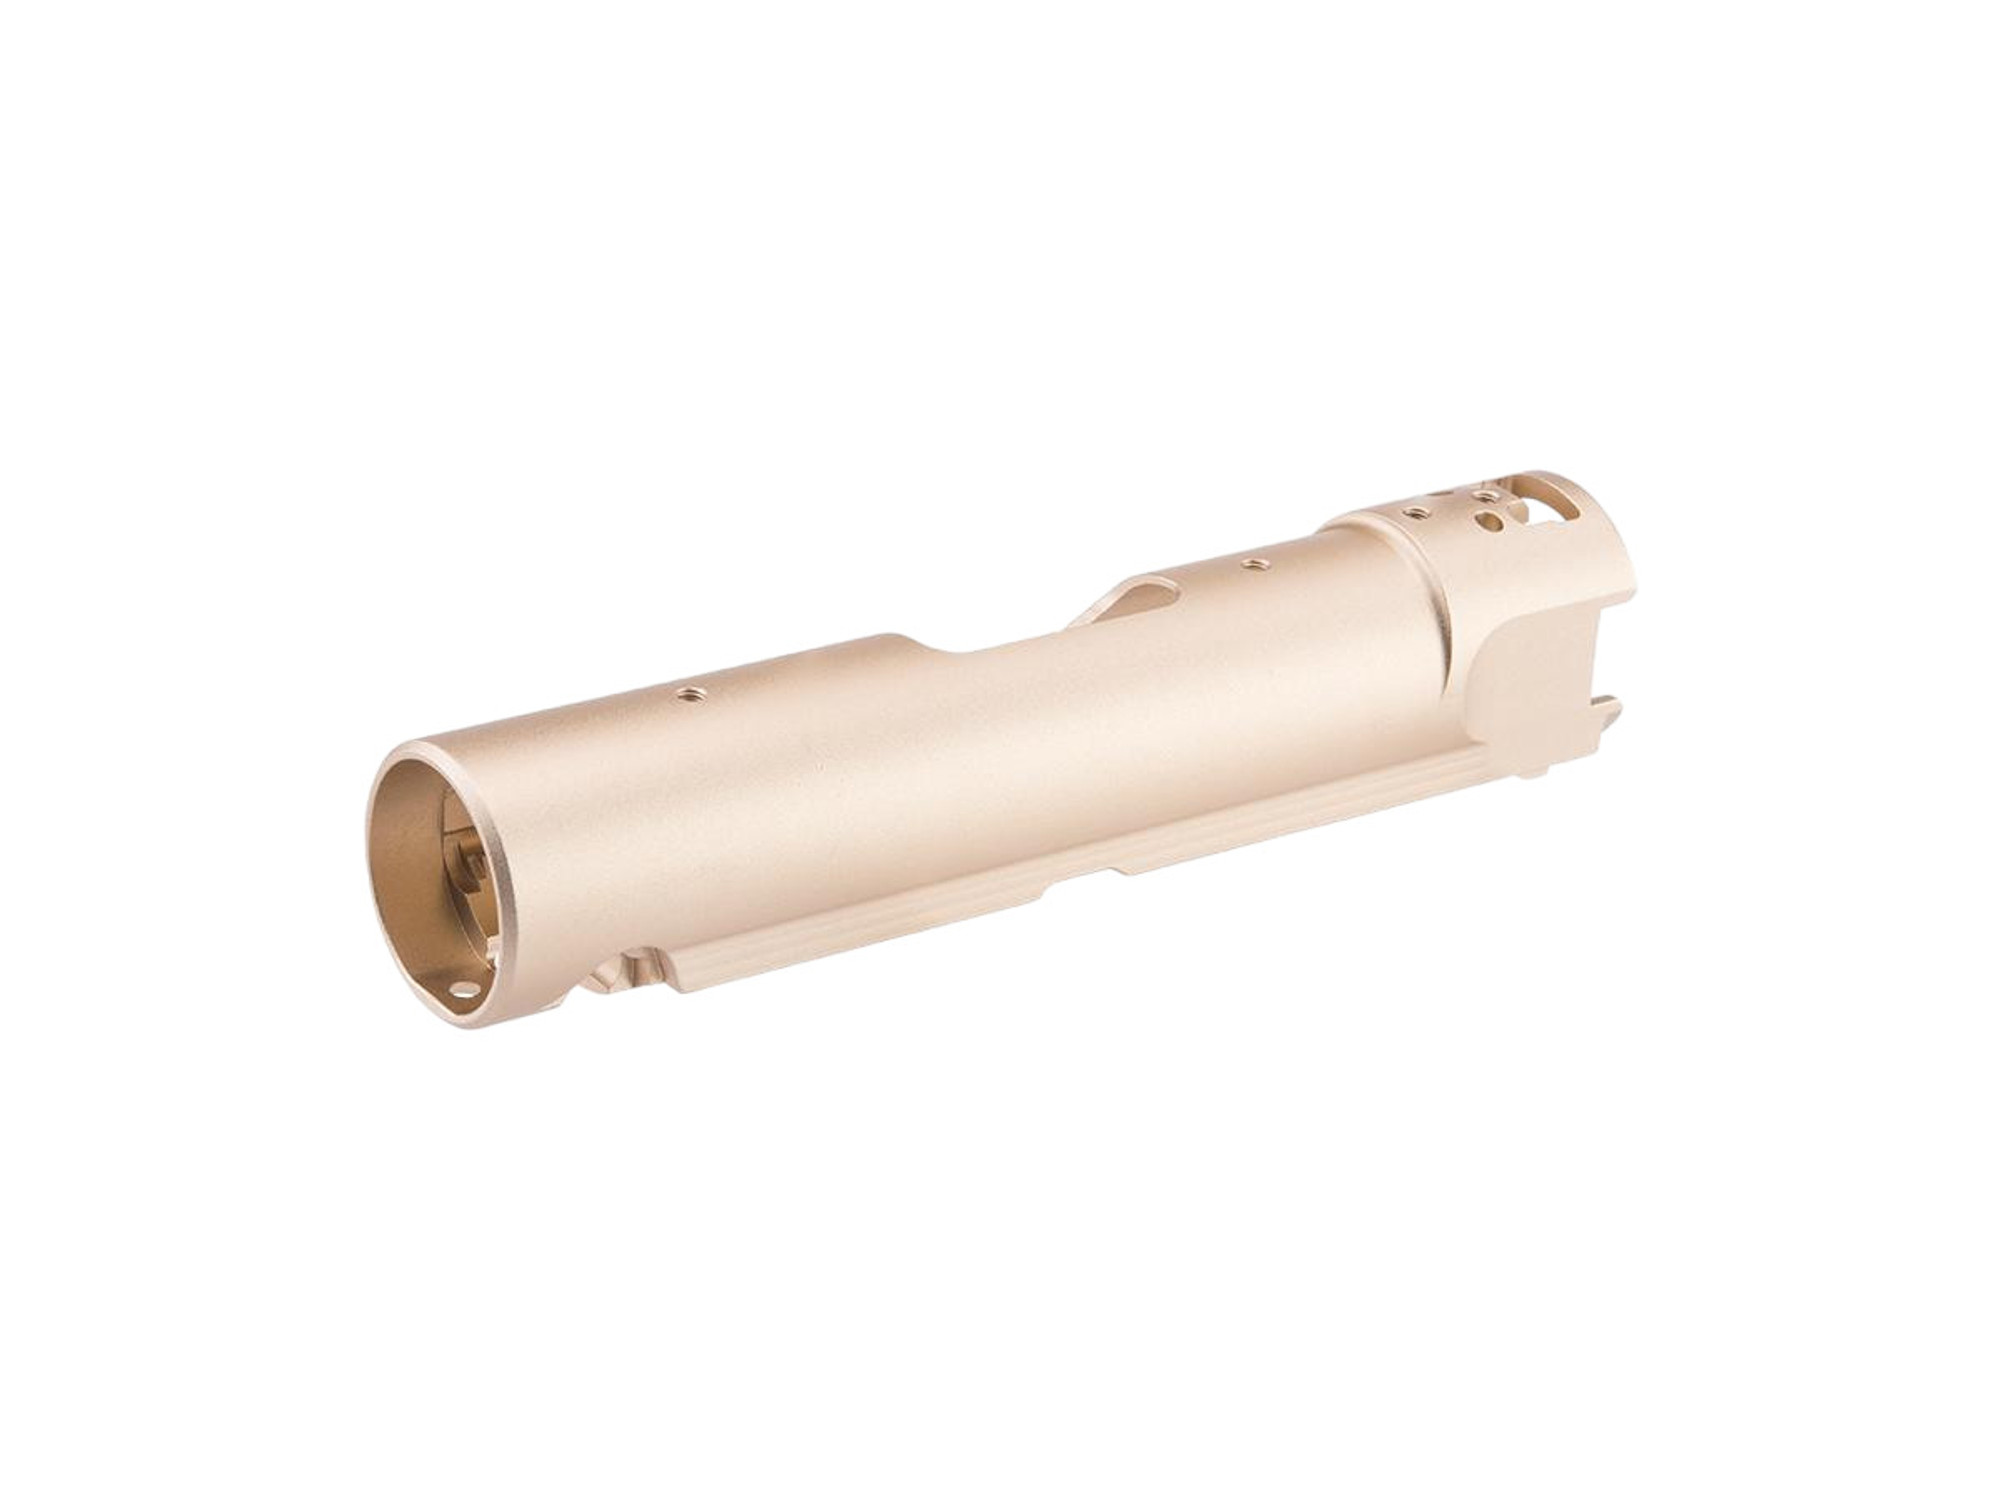 CTM CNC Type-A Upper Receiver for AAP-01 Gas Blowback Airsoft Pistols (Color: Champagne Gold)